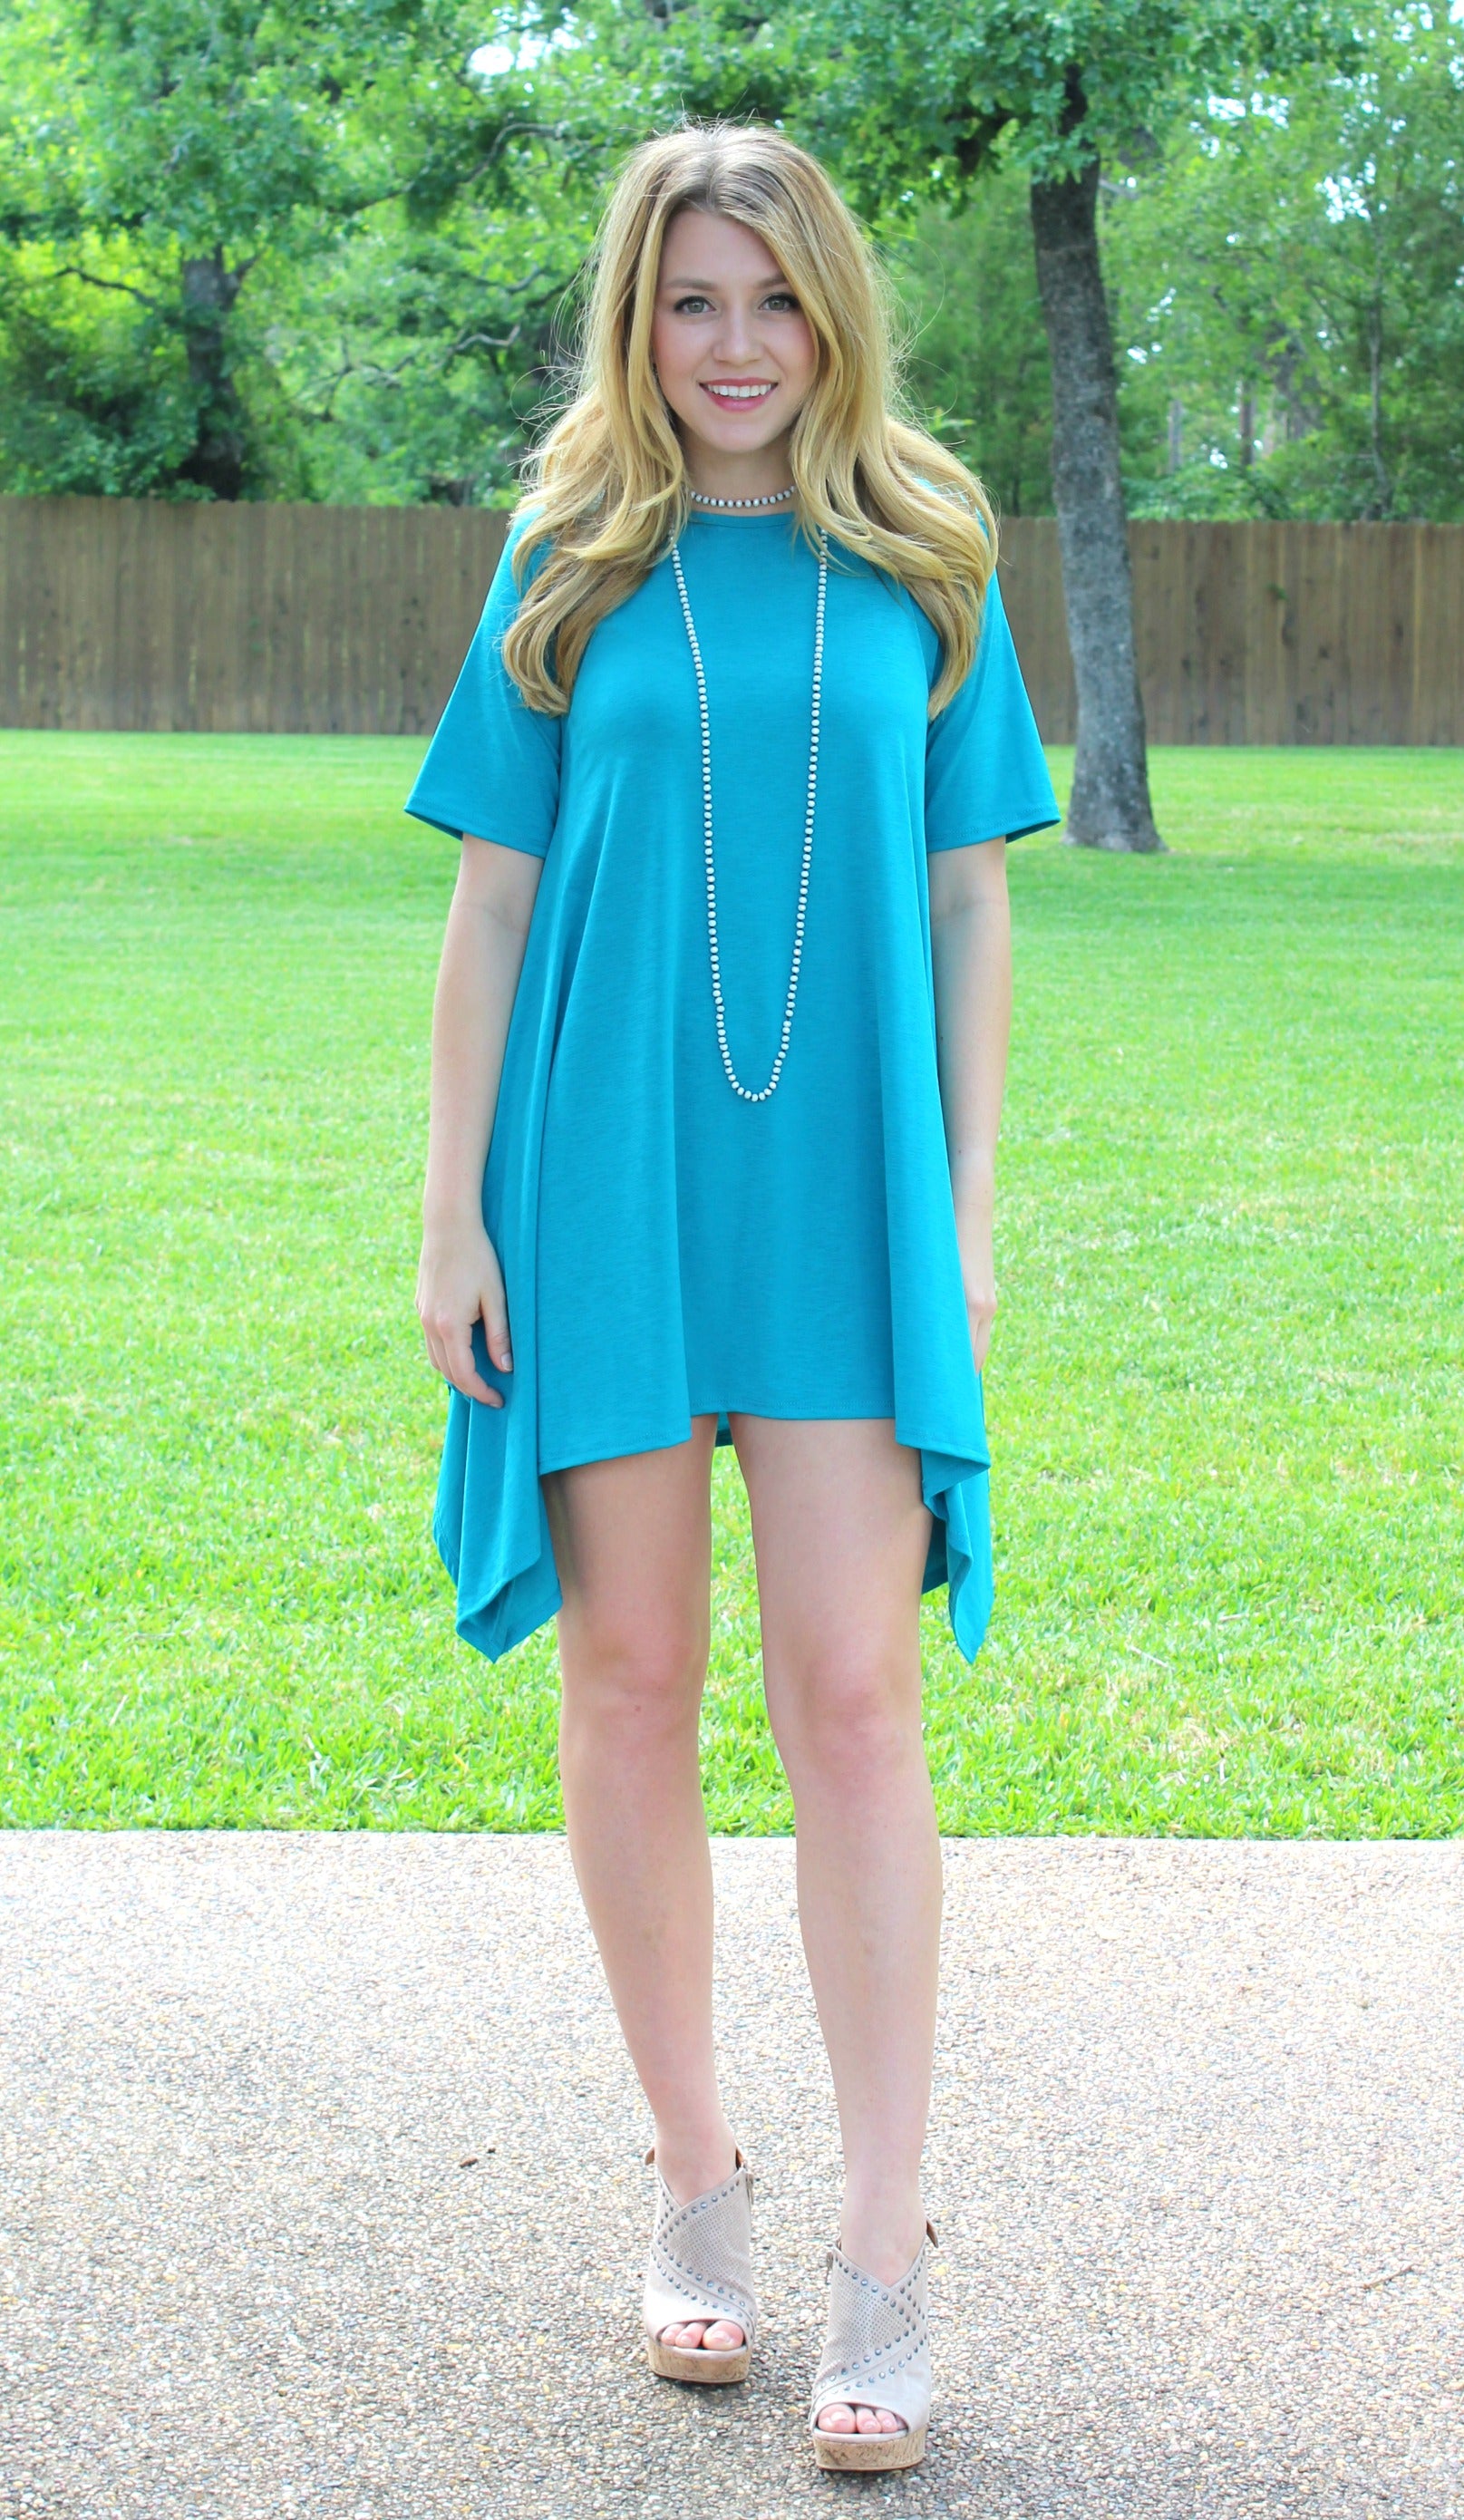 Last Chance Size Small & Medium | Not A Doubt Asymmetrical Hemline Tunic in Turquoise - Giddy Up Glamour Boutique